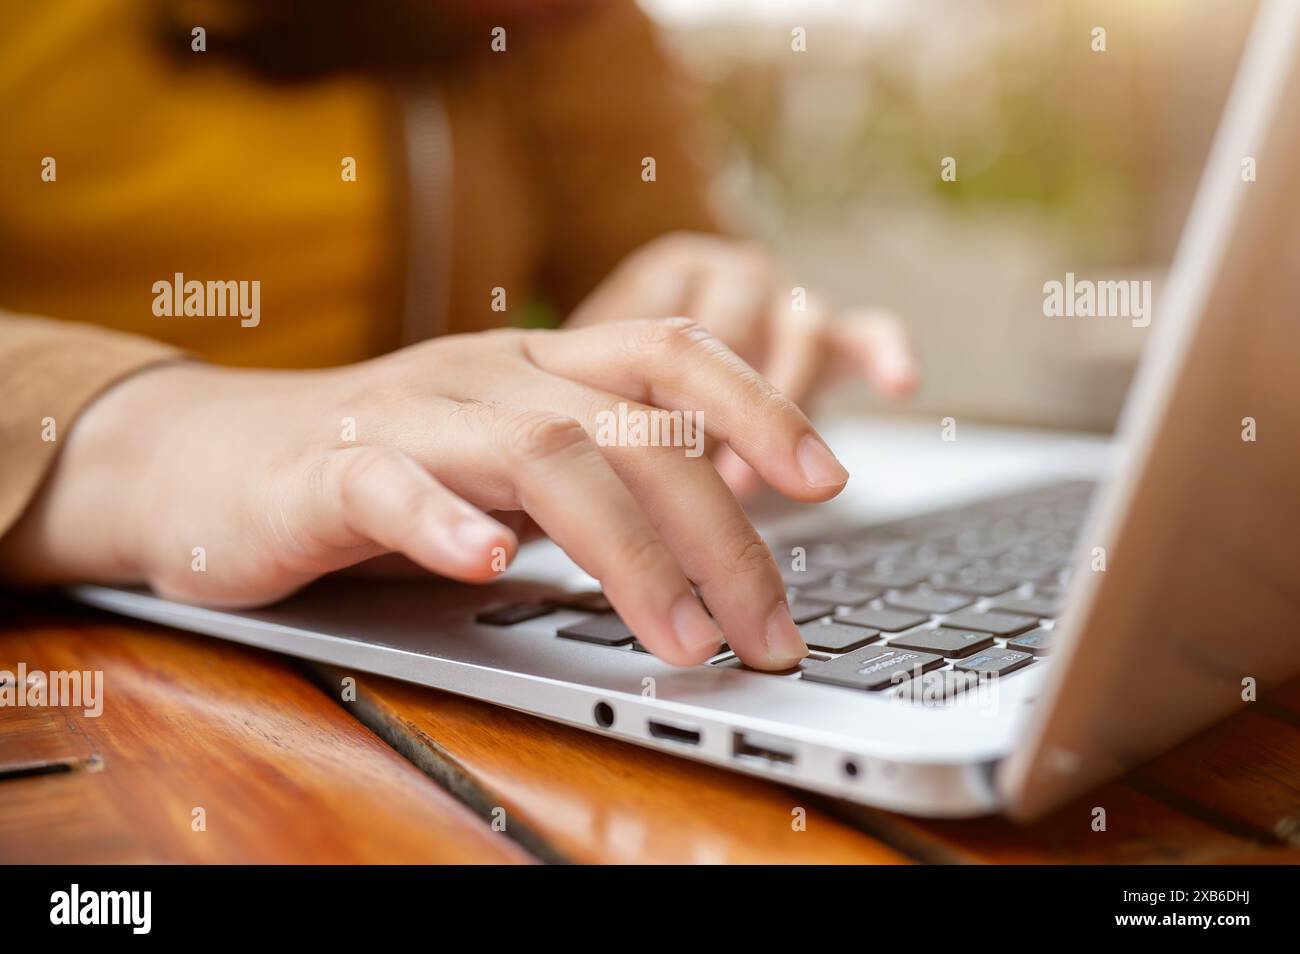 A close-up image of a woman working remotely from a cafe, working on her laptop computer, typing on the laptop keyboard, responding to emails or surfi Stock Photo